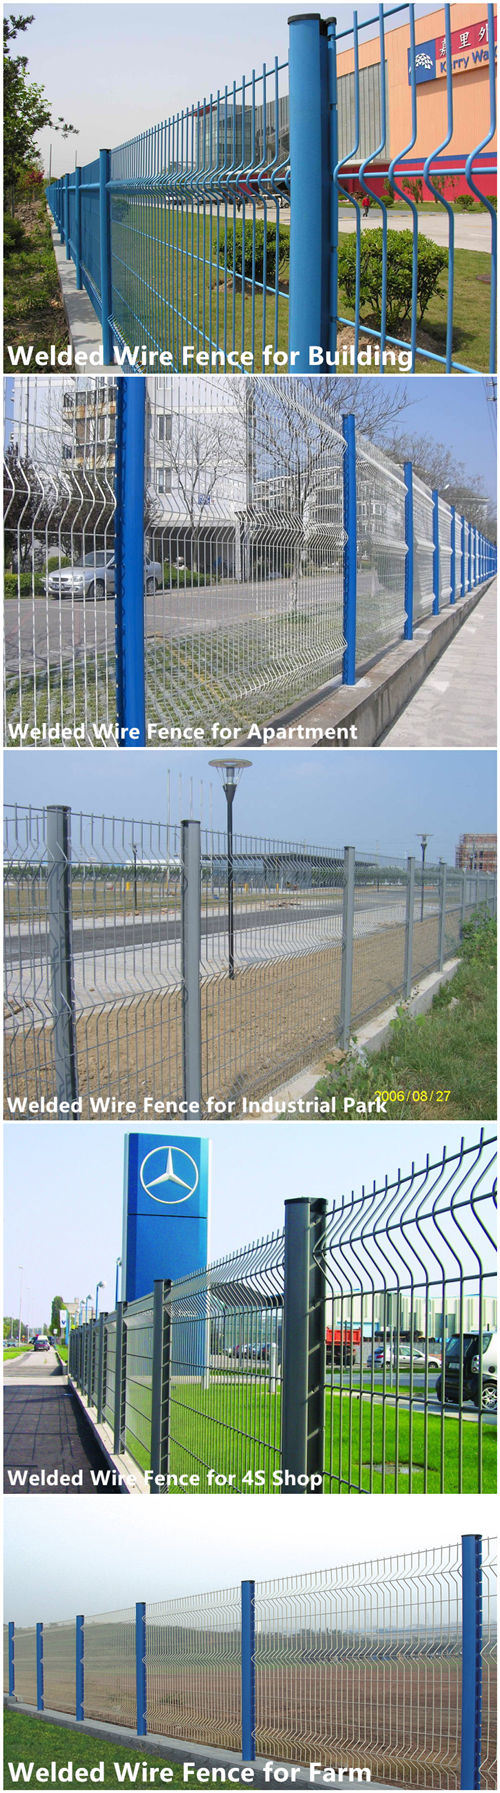 Moderate Price China Wholesale Metal Steel Wire Mesh Fence (WWMF)